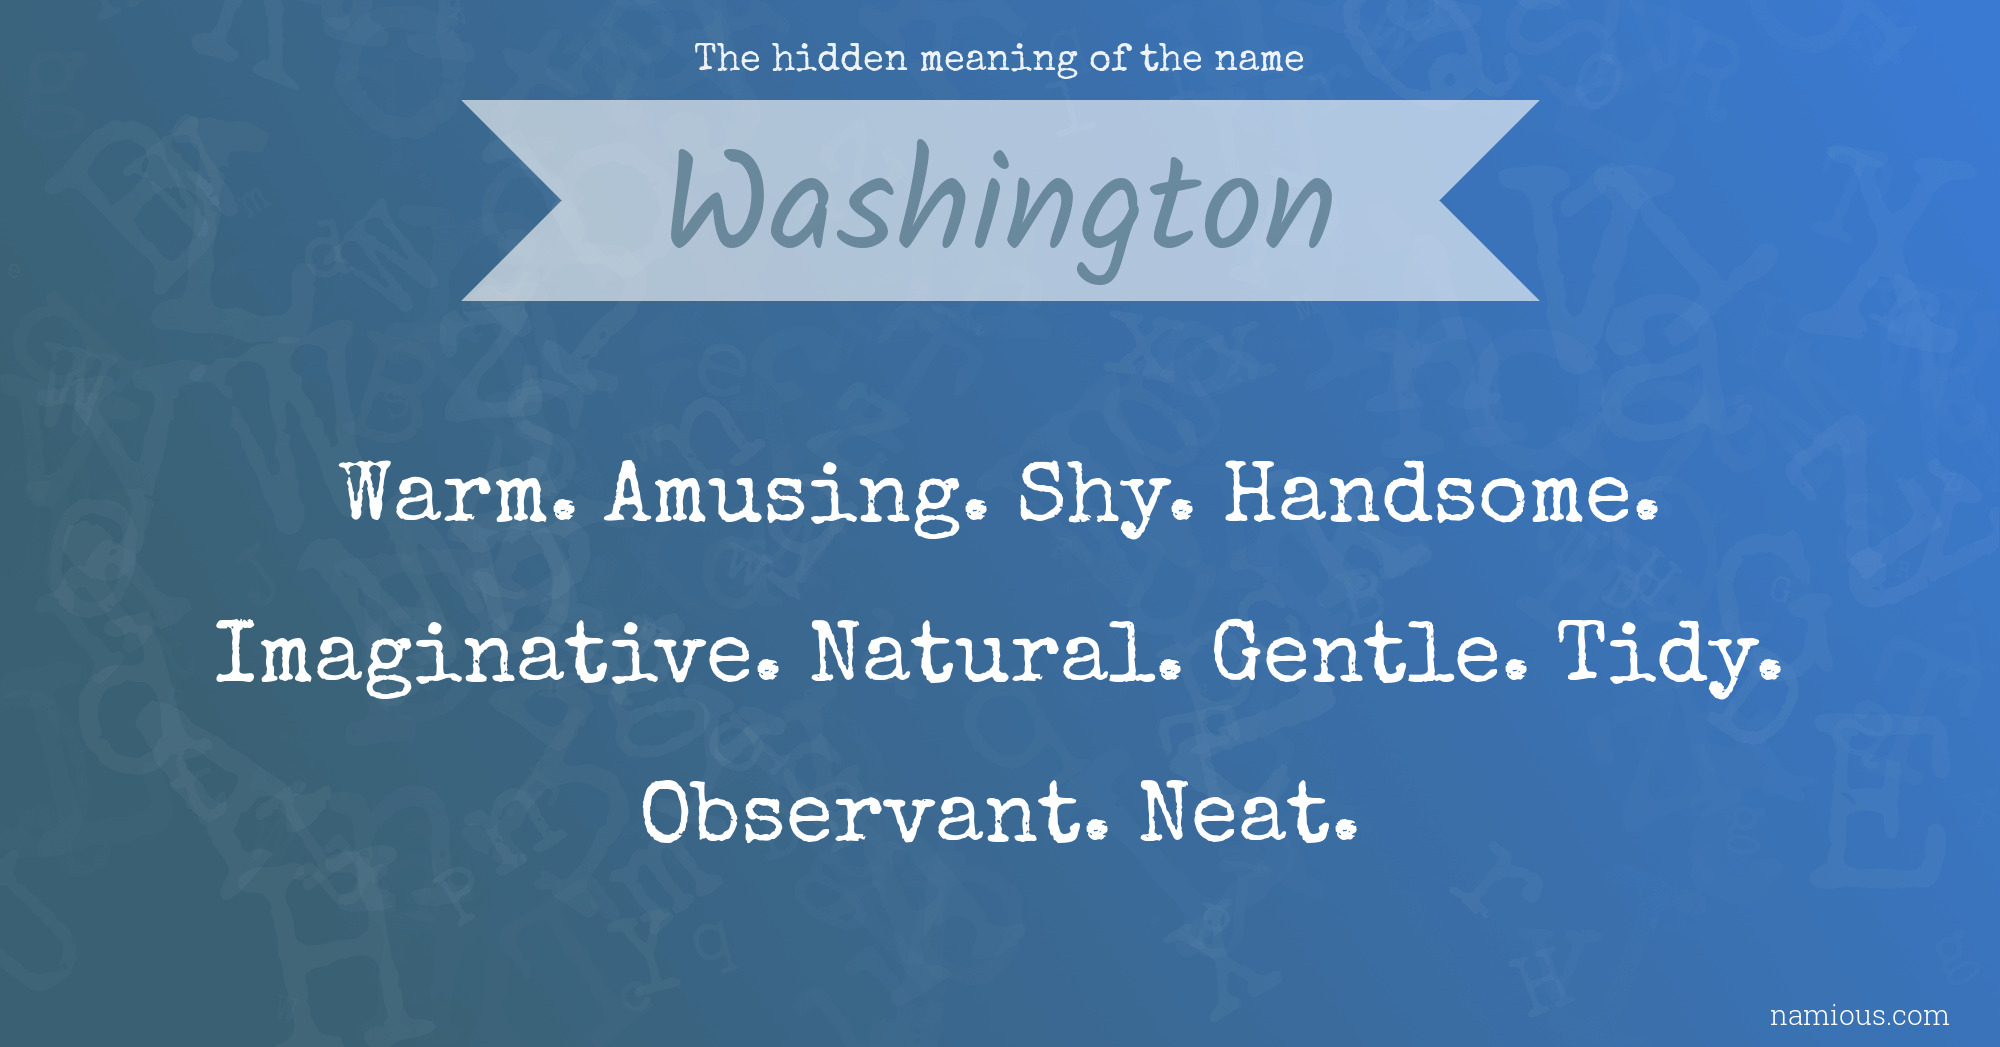 The hidden meaning of the name Washington